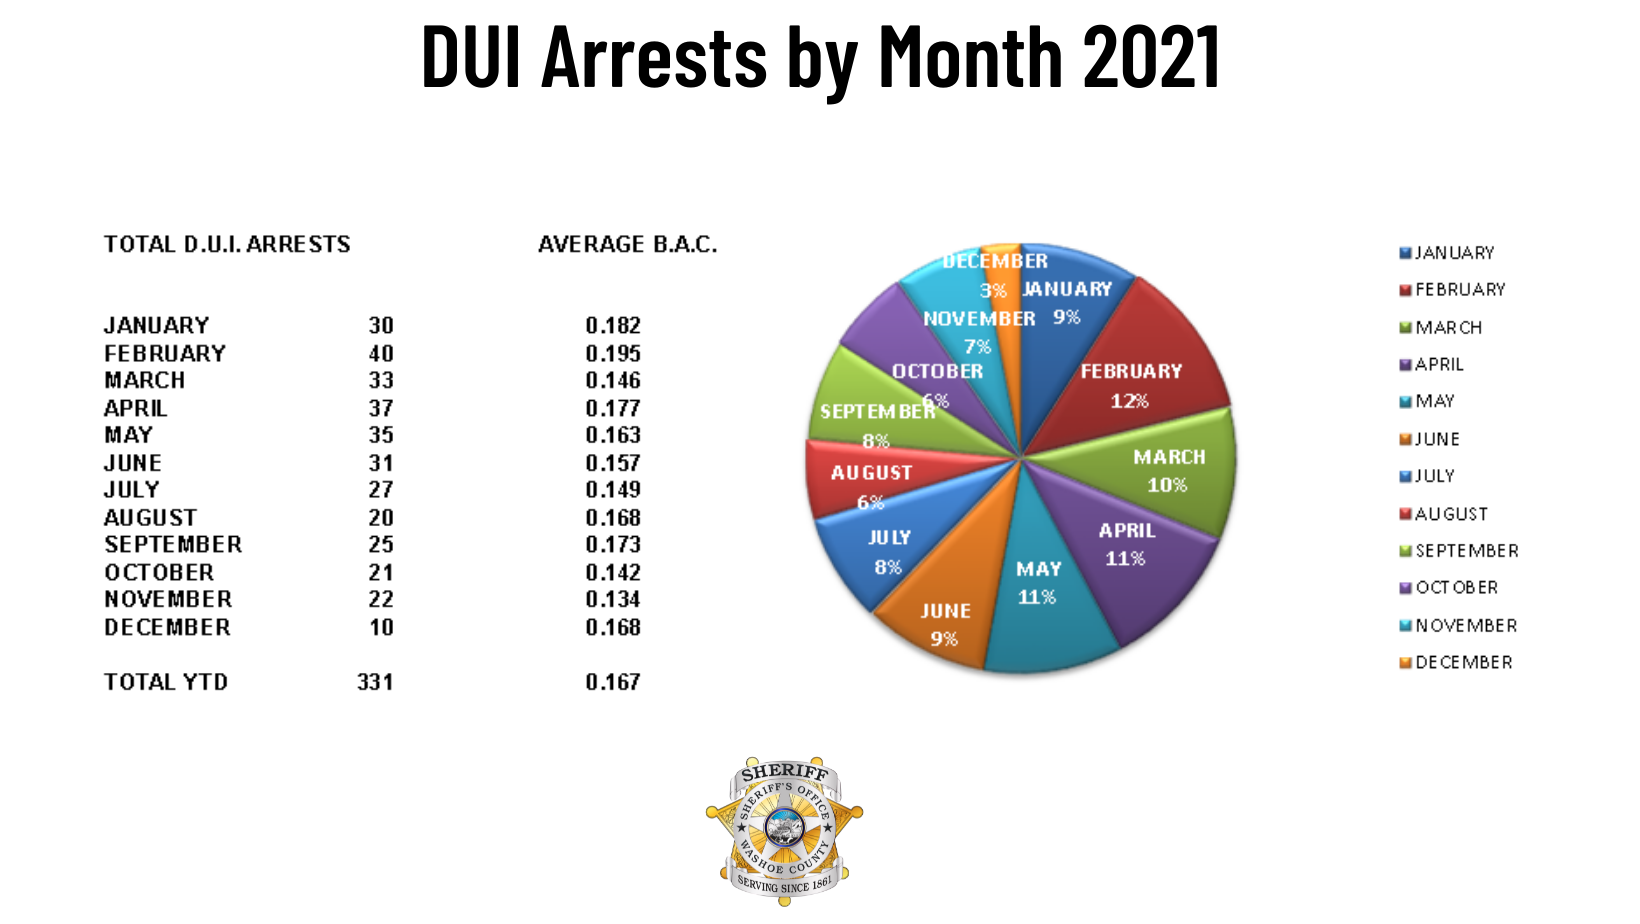 DUI-Arrests-by-Month-2021-CANVA.png